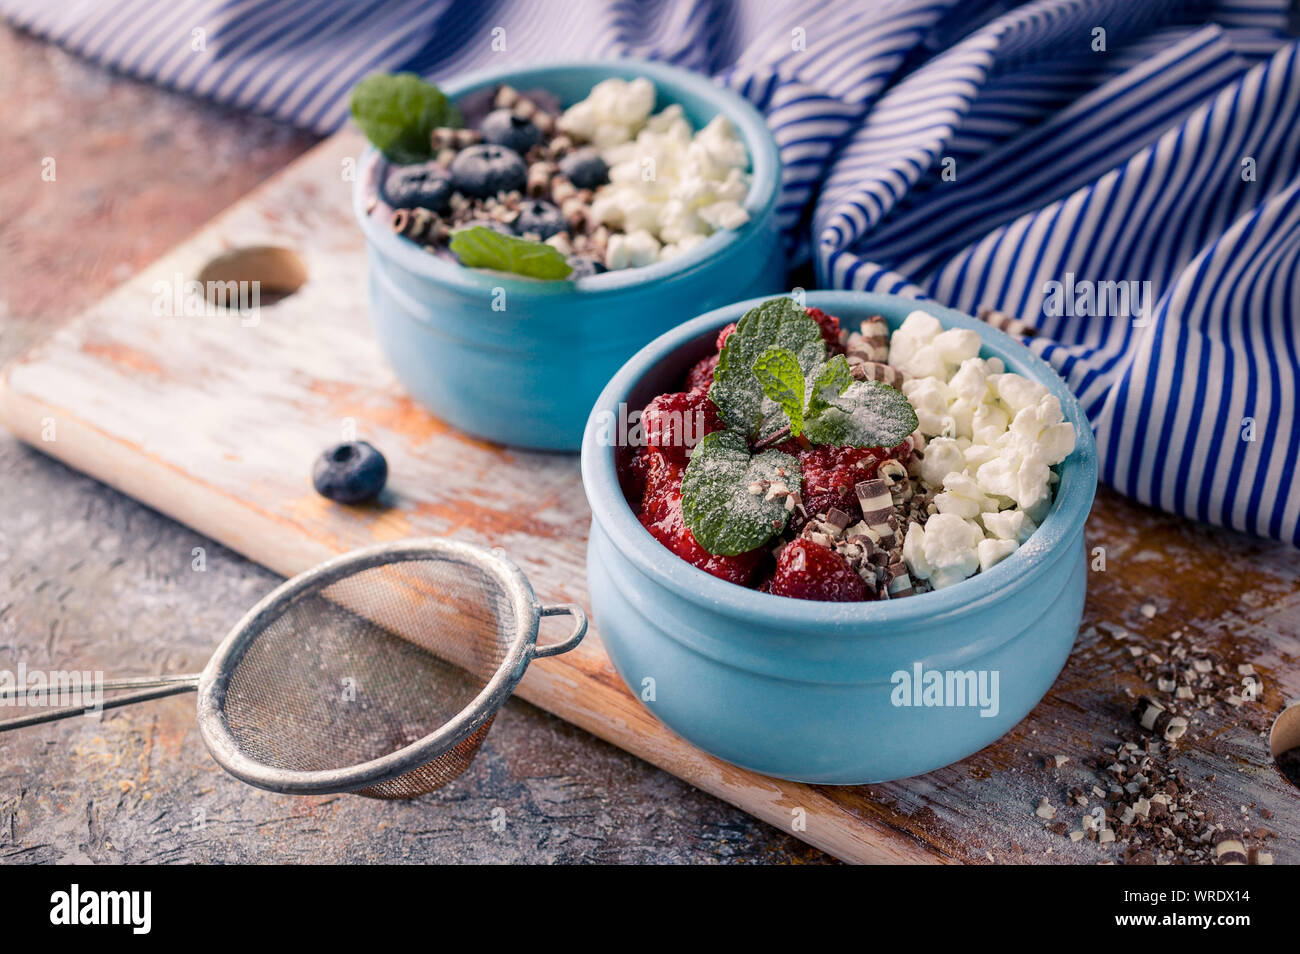 Cottage sweet dessert with jam in blue deep bowl, Strawberry jam and blueberries Stock Photo